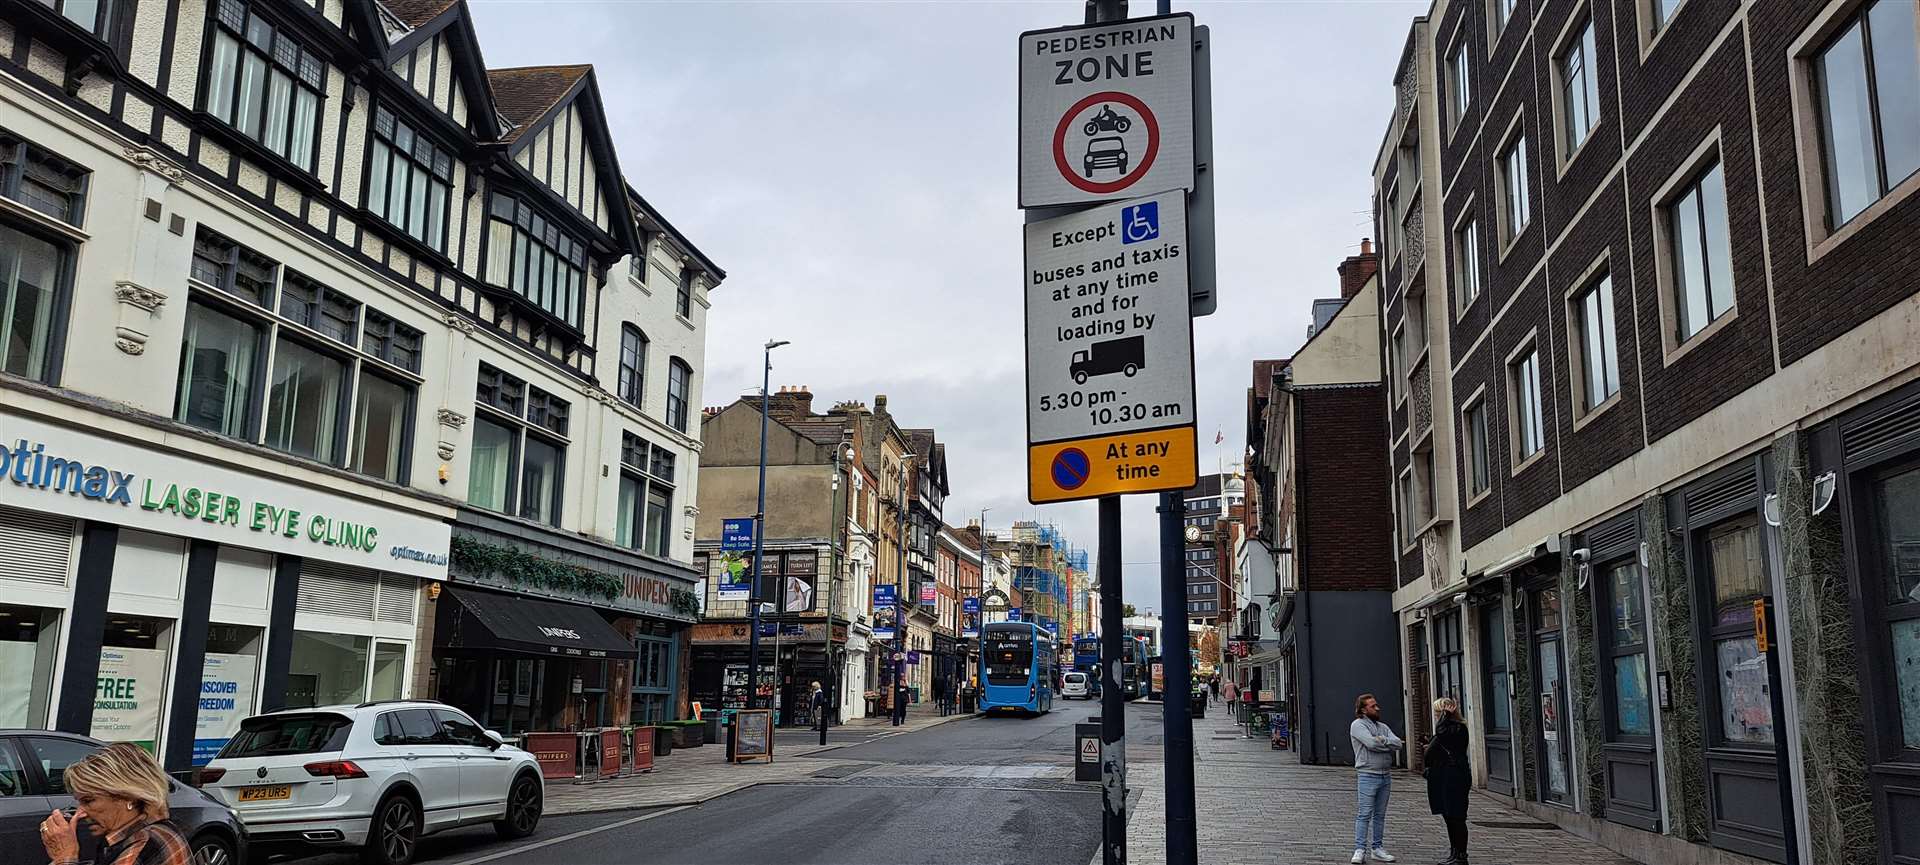 ANPR cameras will soon be appearing in Maidstone High Street